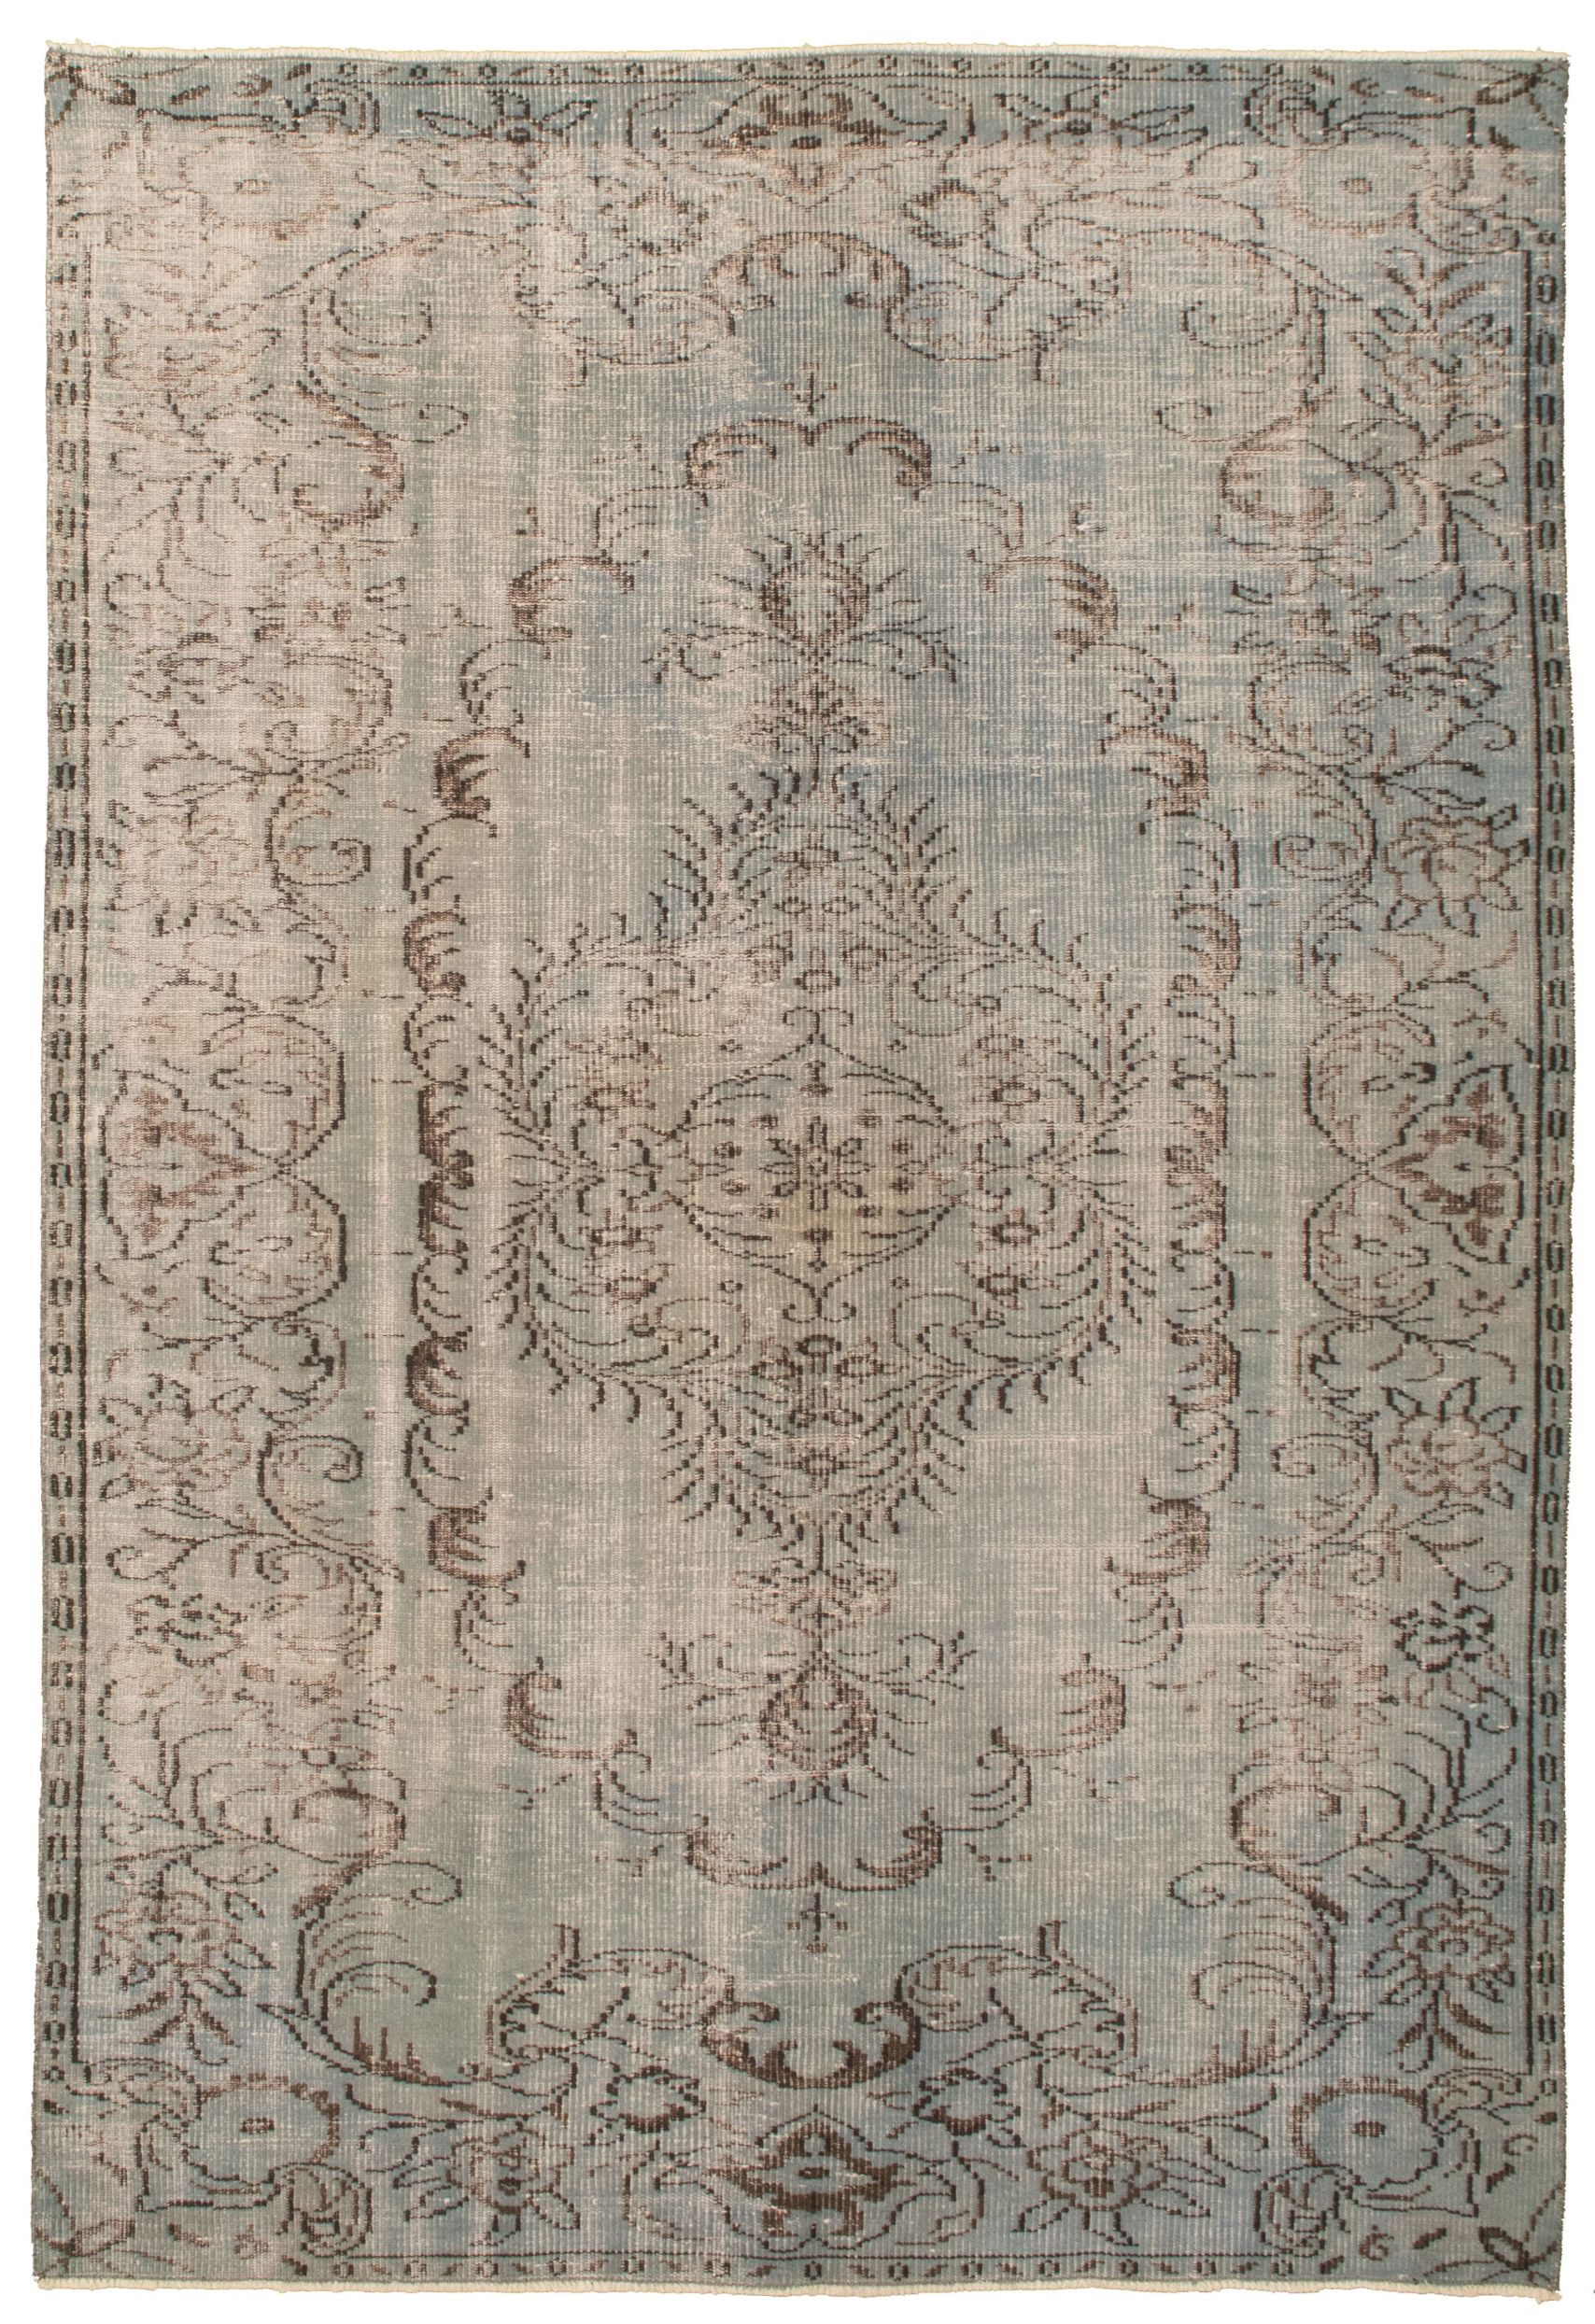 Hand-knotted Color Transition Grey Wool Rug 5'3" x 8'3" Size: 5'3" x 8'3"  